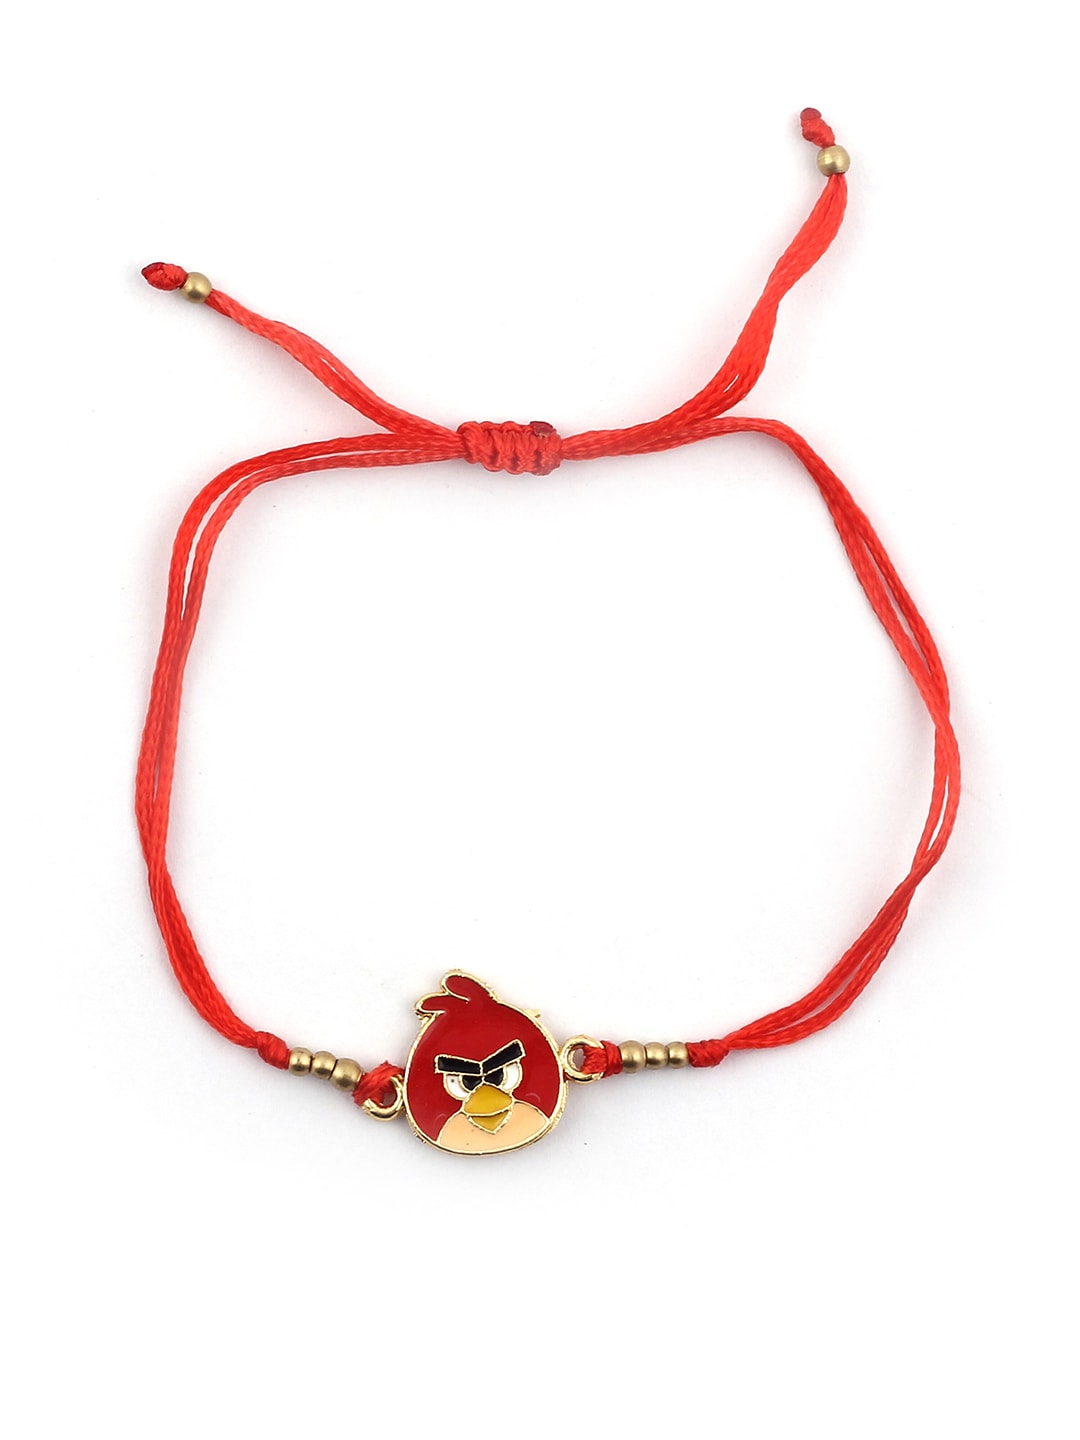 Buy Angry Birds Black on Red Rubber Bracelet at Ubuy India